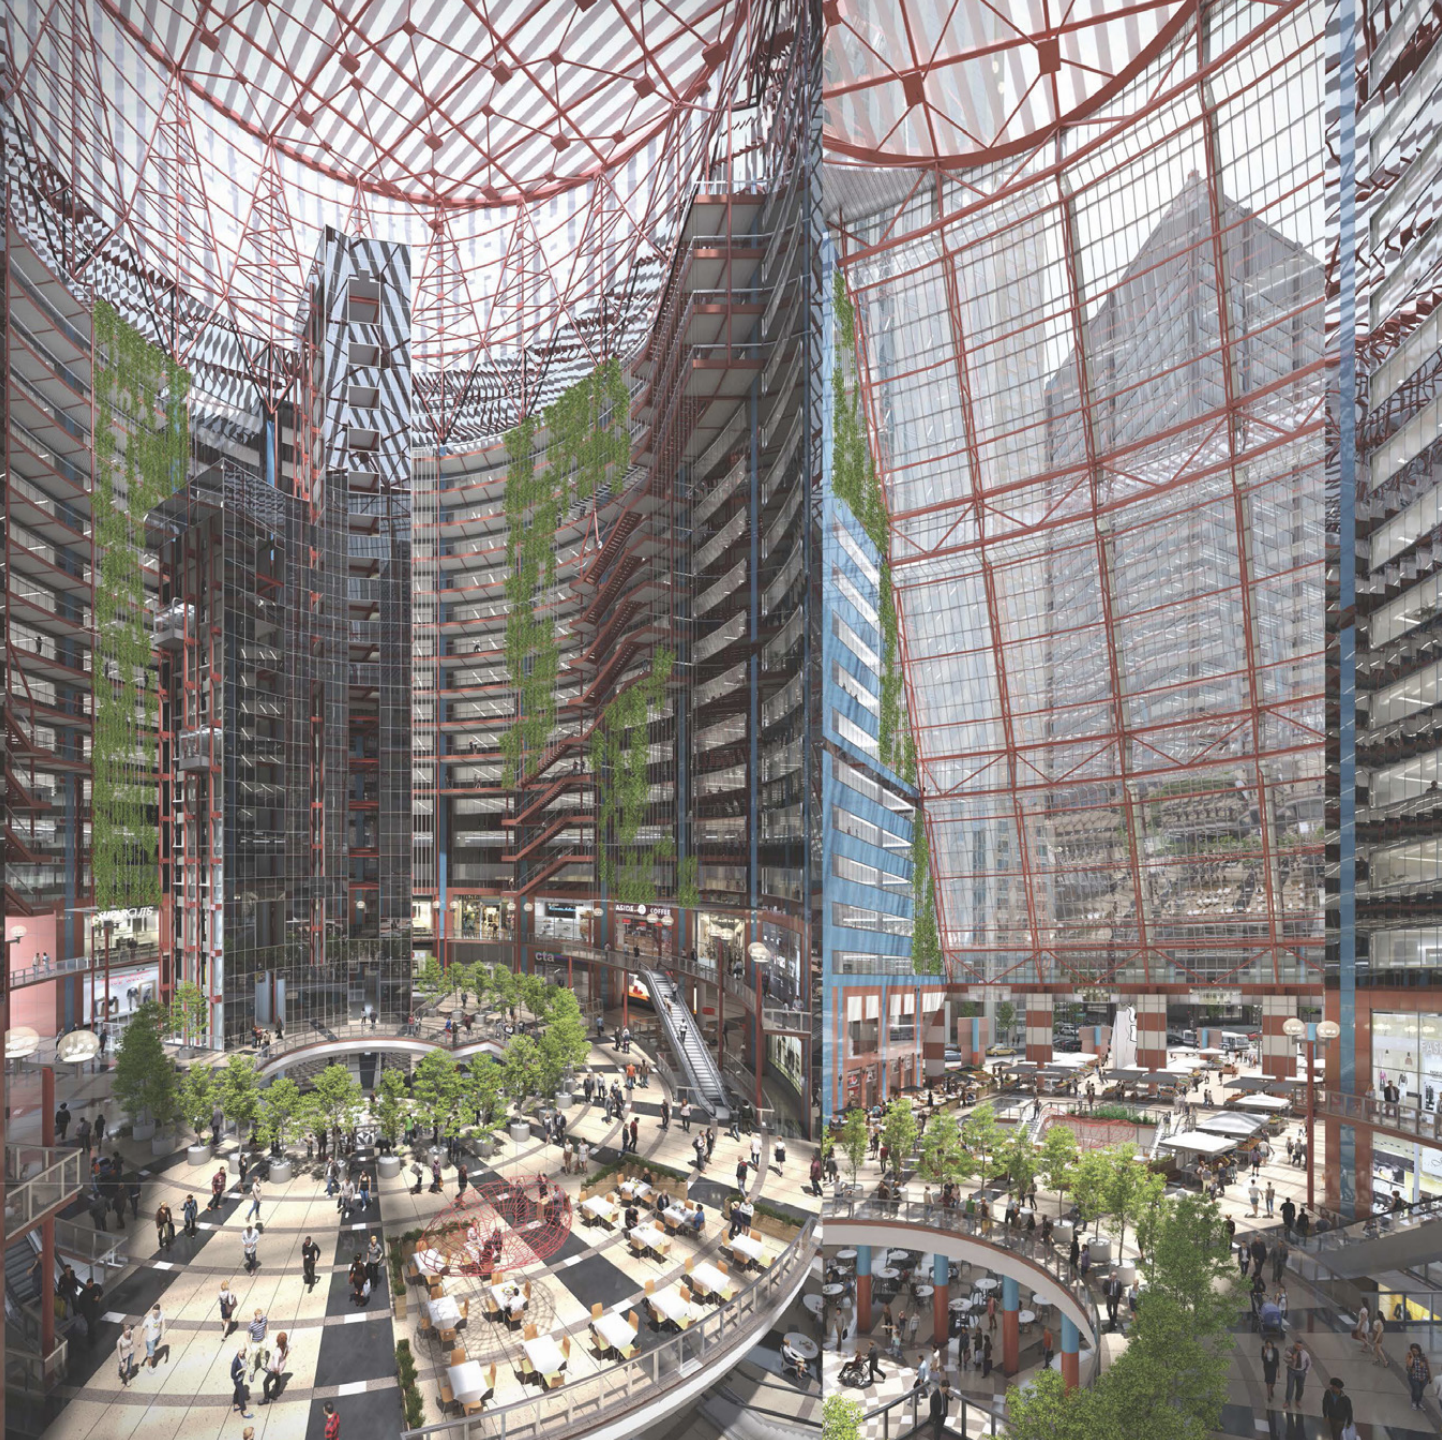 More recent adaptive reuse conceptual proposal of Thompson Center